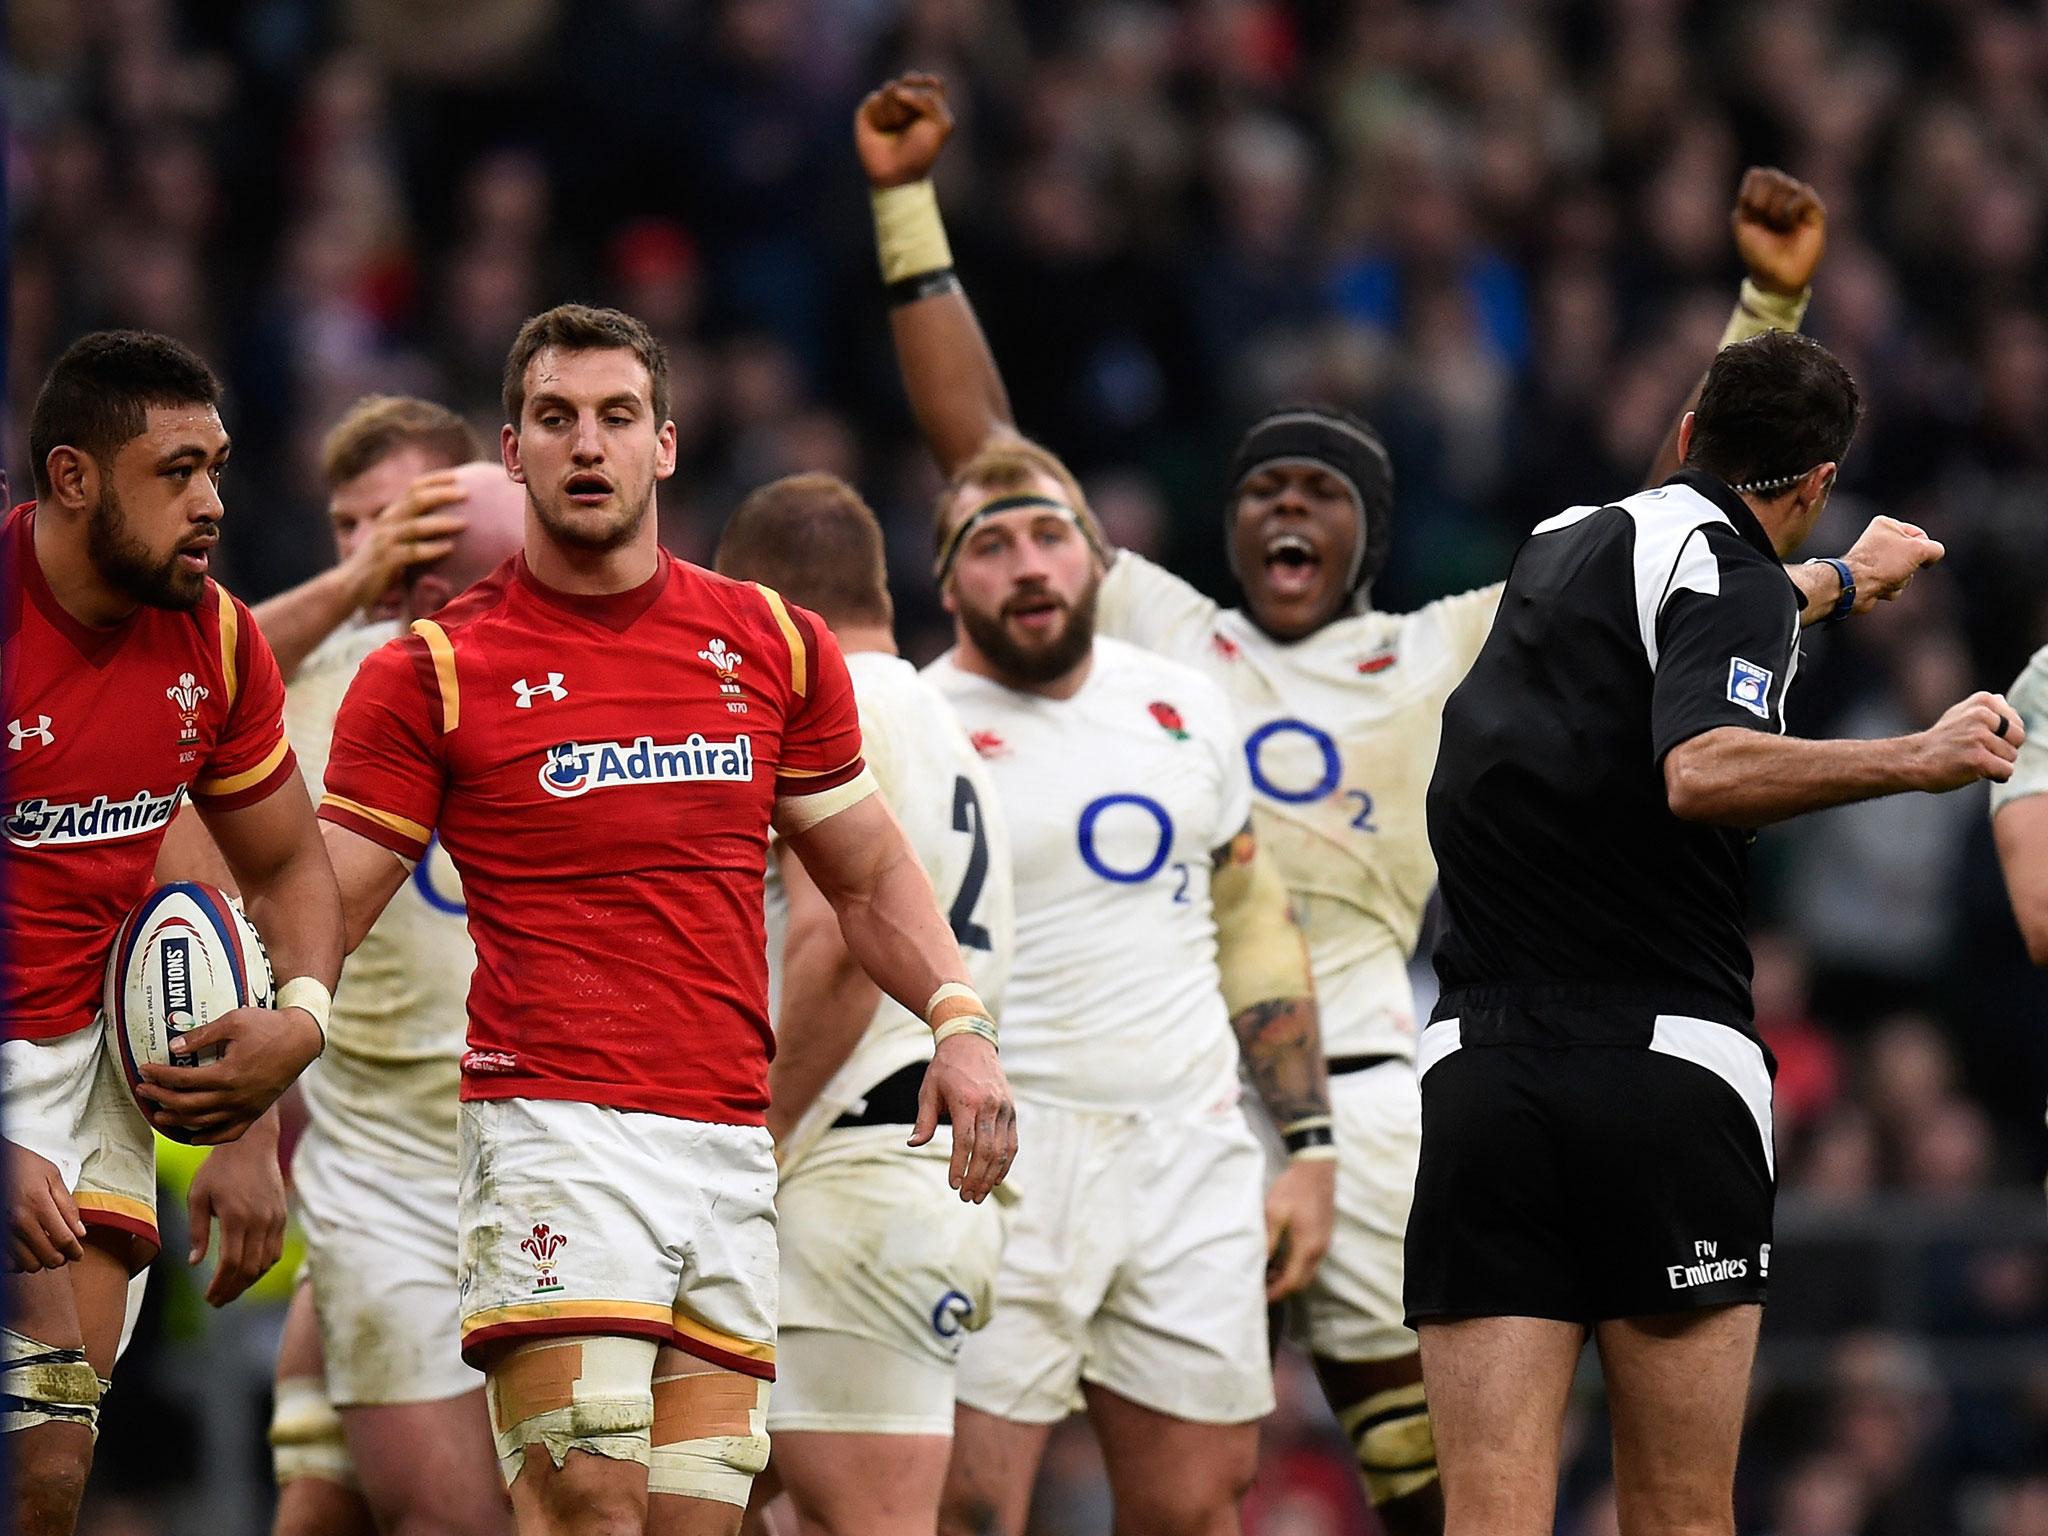 Wales and England's rugby rivalry is steeped in history but it is not one based on hatred